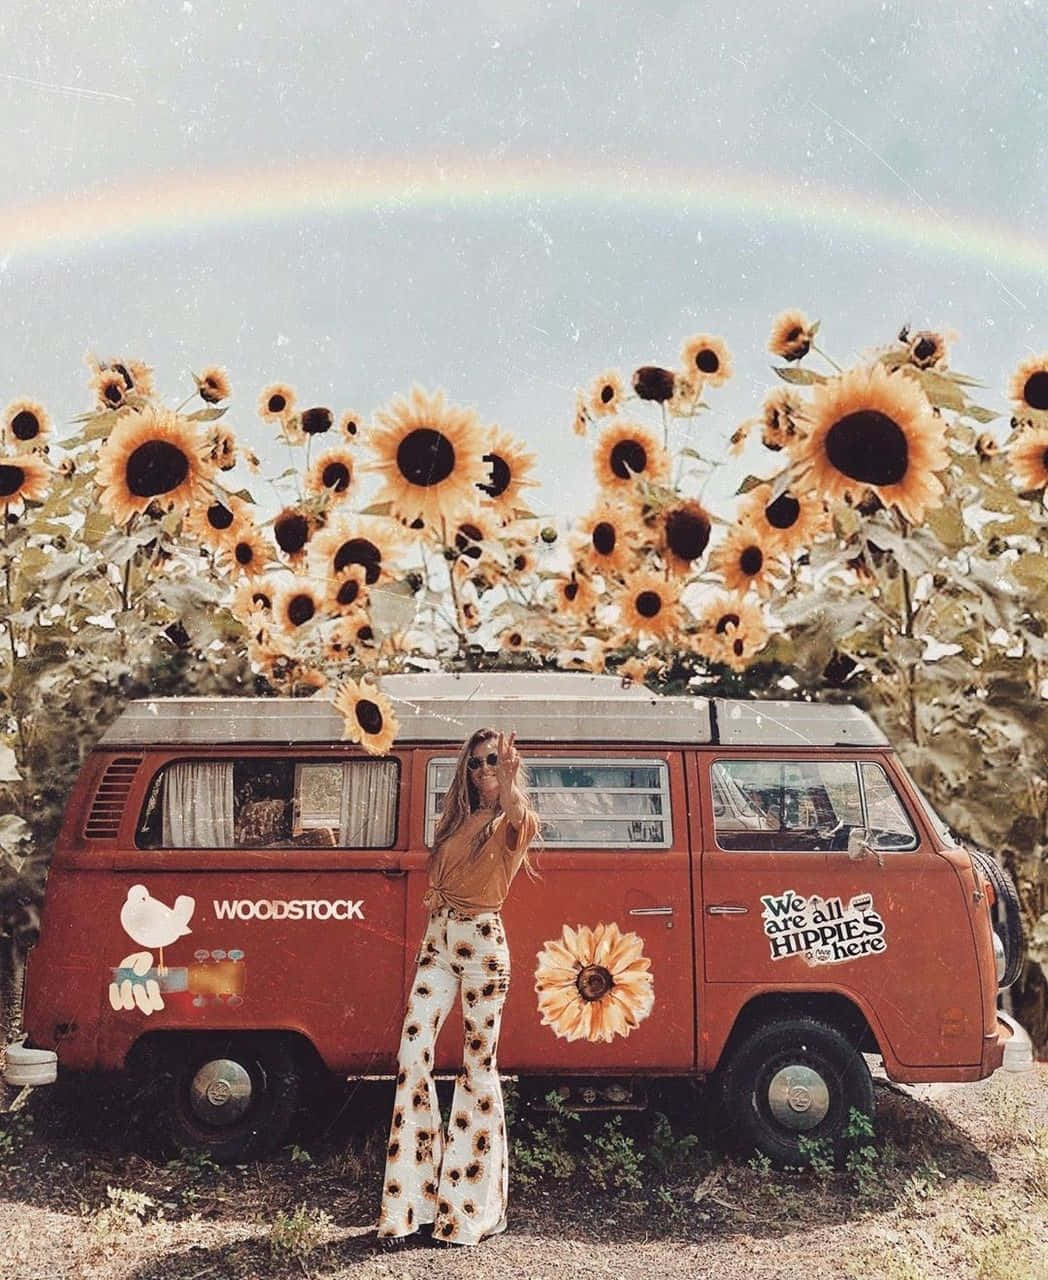 A Woman Standing Next To A Vw Van With Sunflowers In The Background